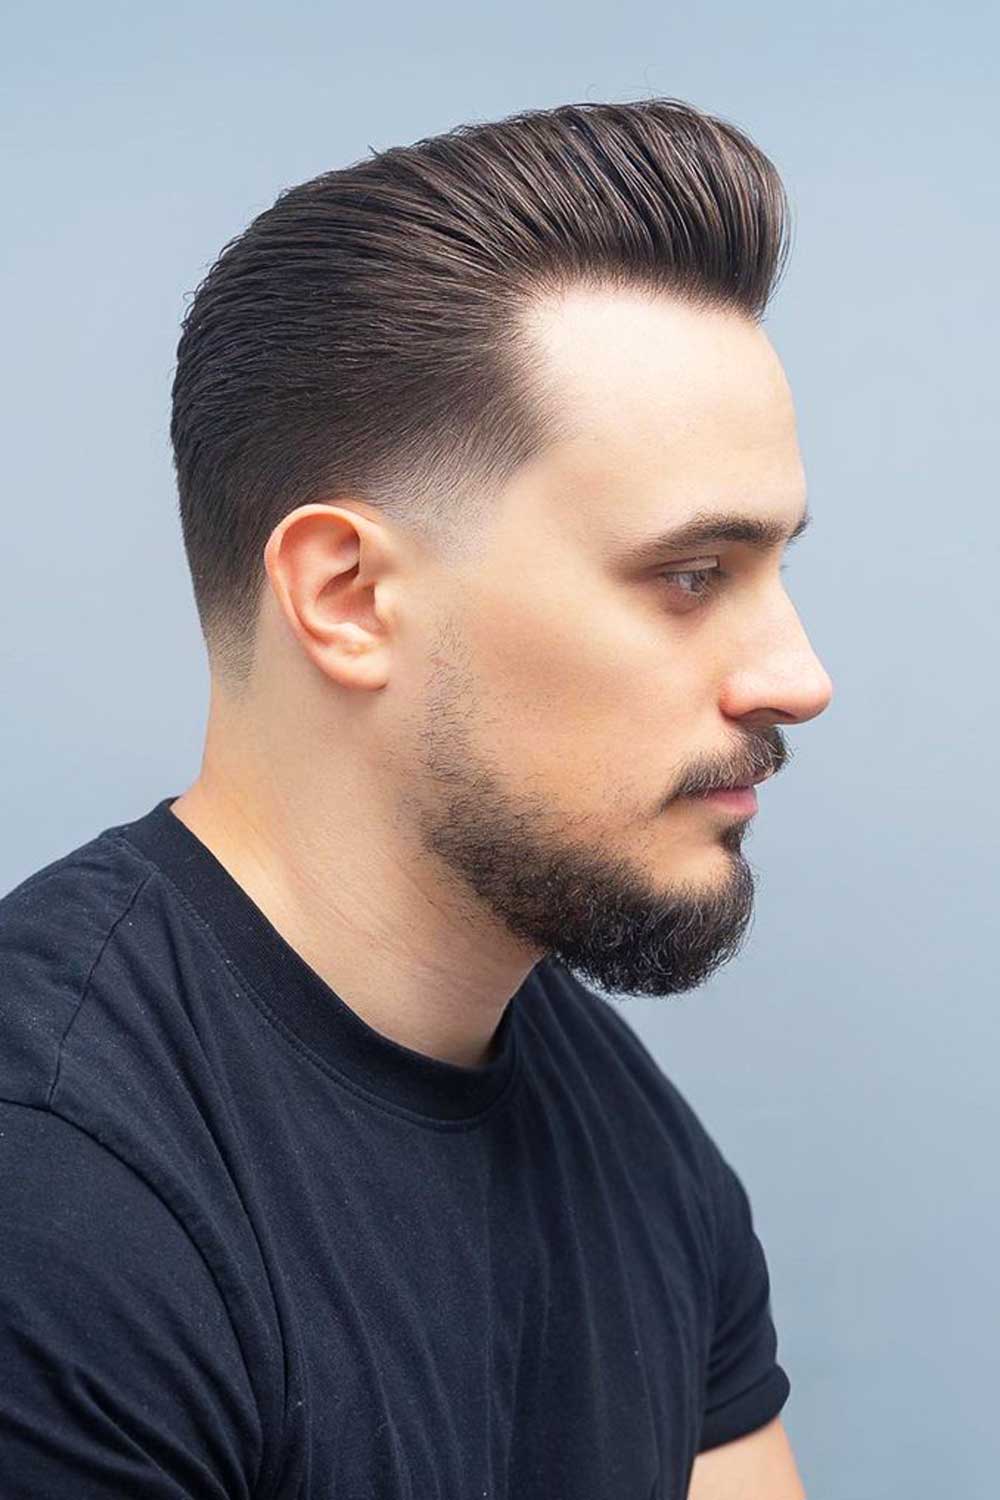 Short Pompadour Fade Hairstyles #shorthaircutsformen #shorthaircuts #shorthairstyles #shorthair